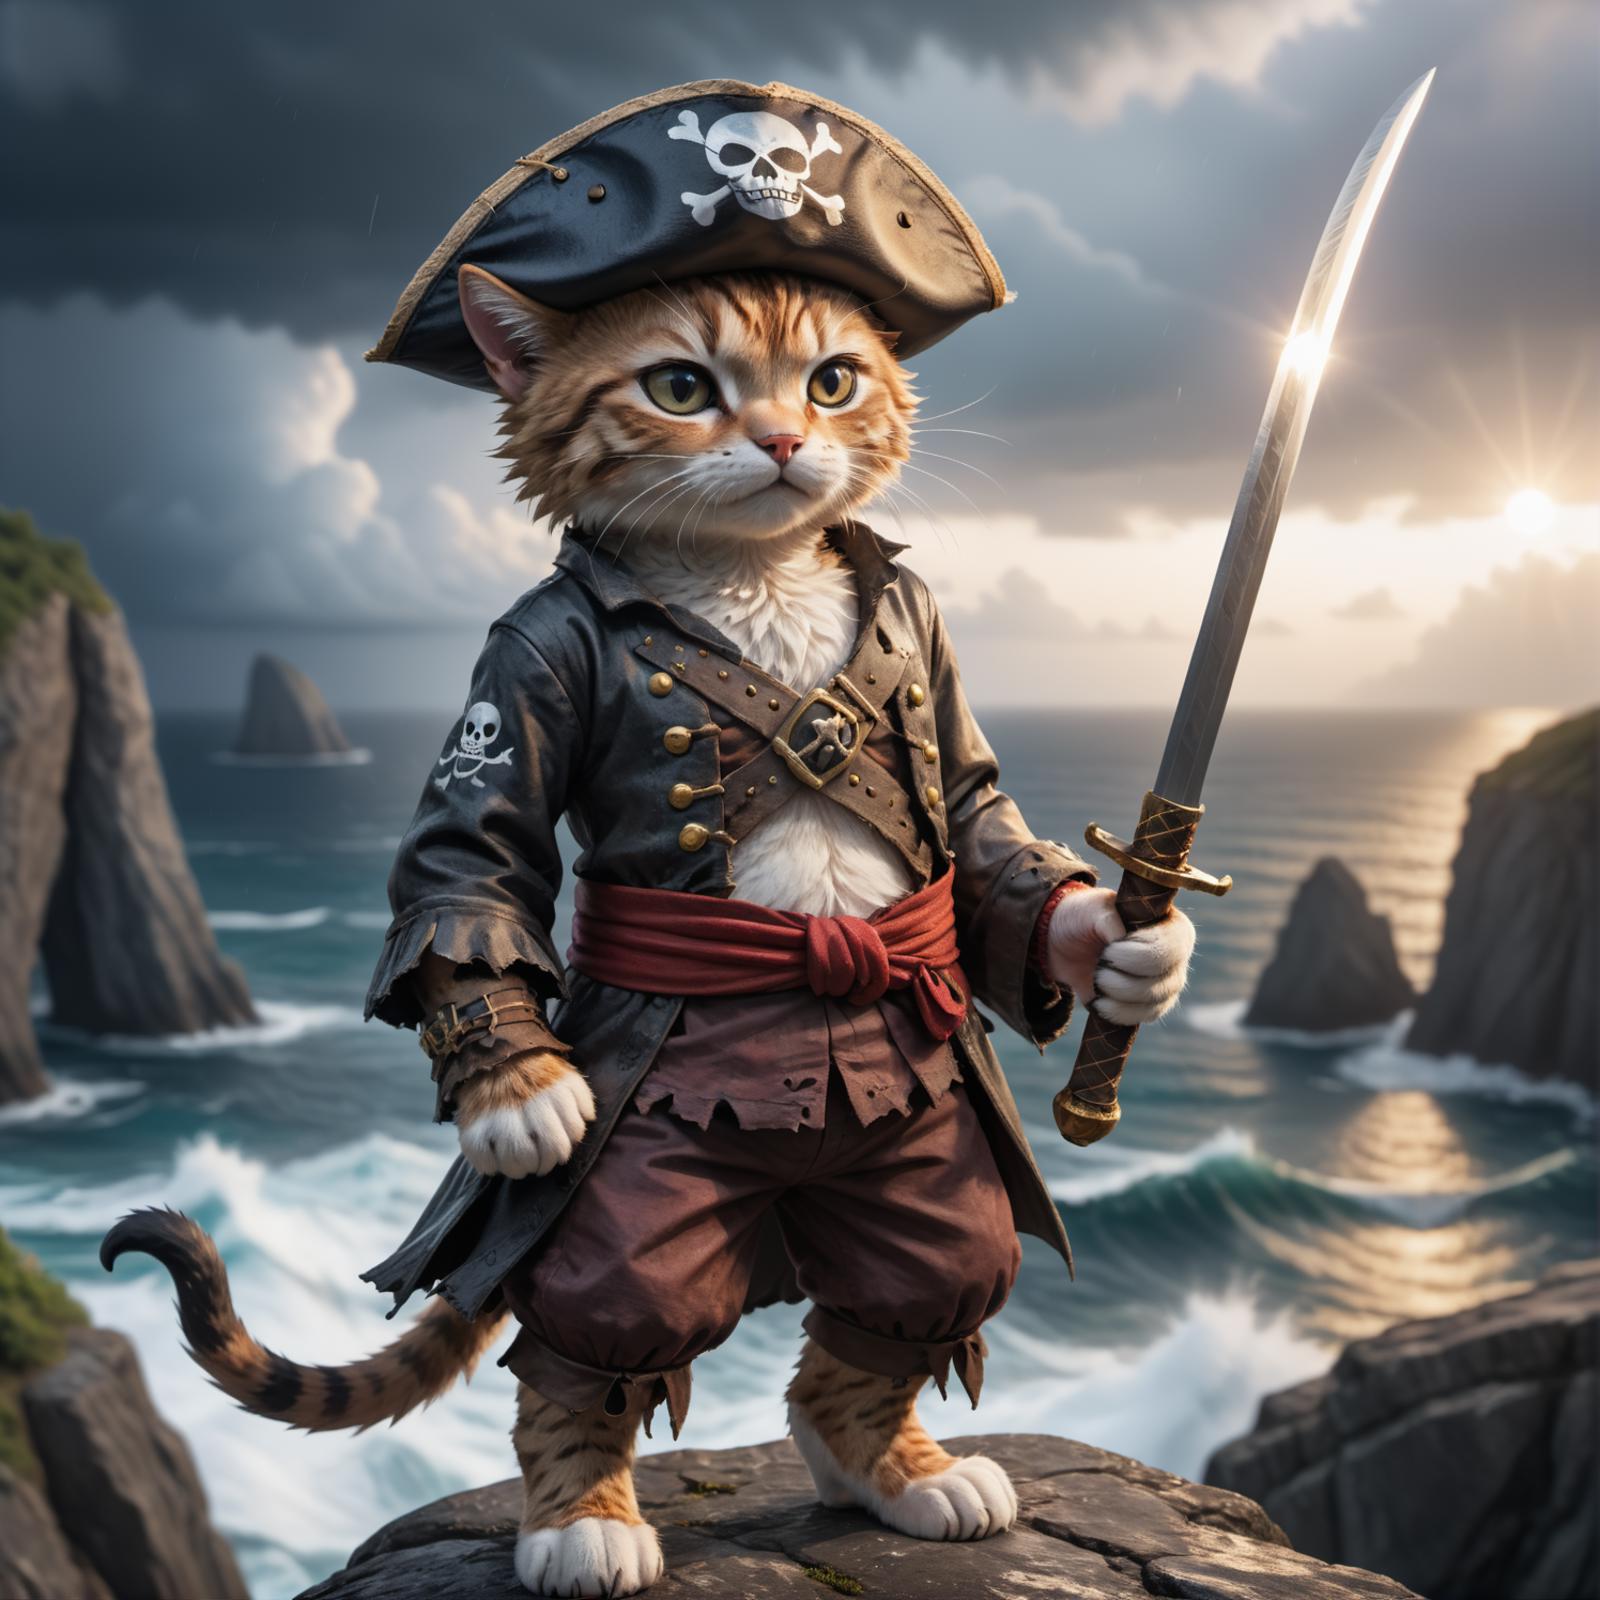 A cartoon cat dressed as a pirate with a sword.